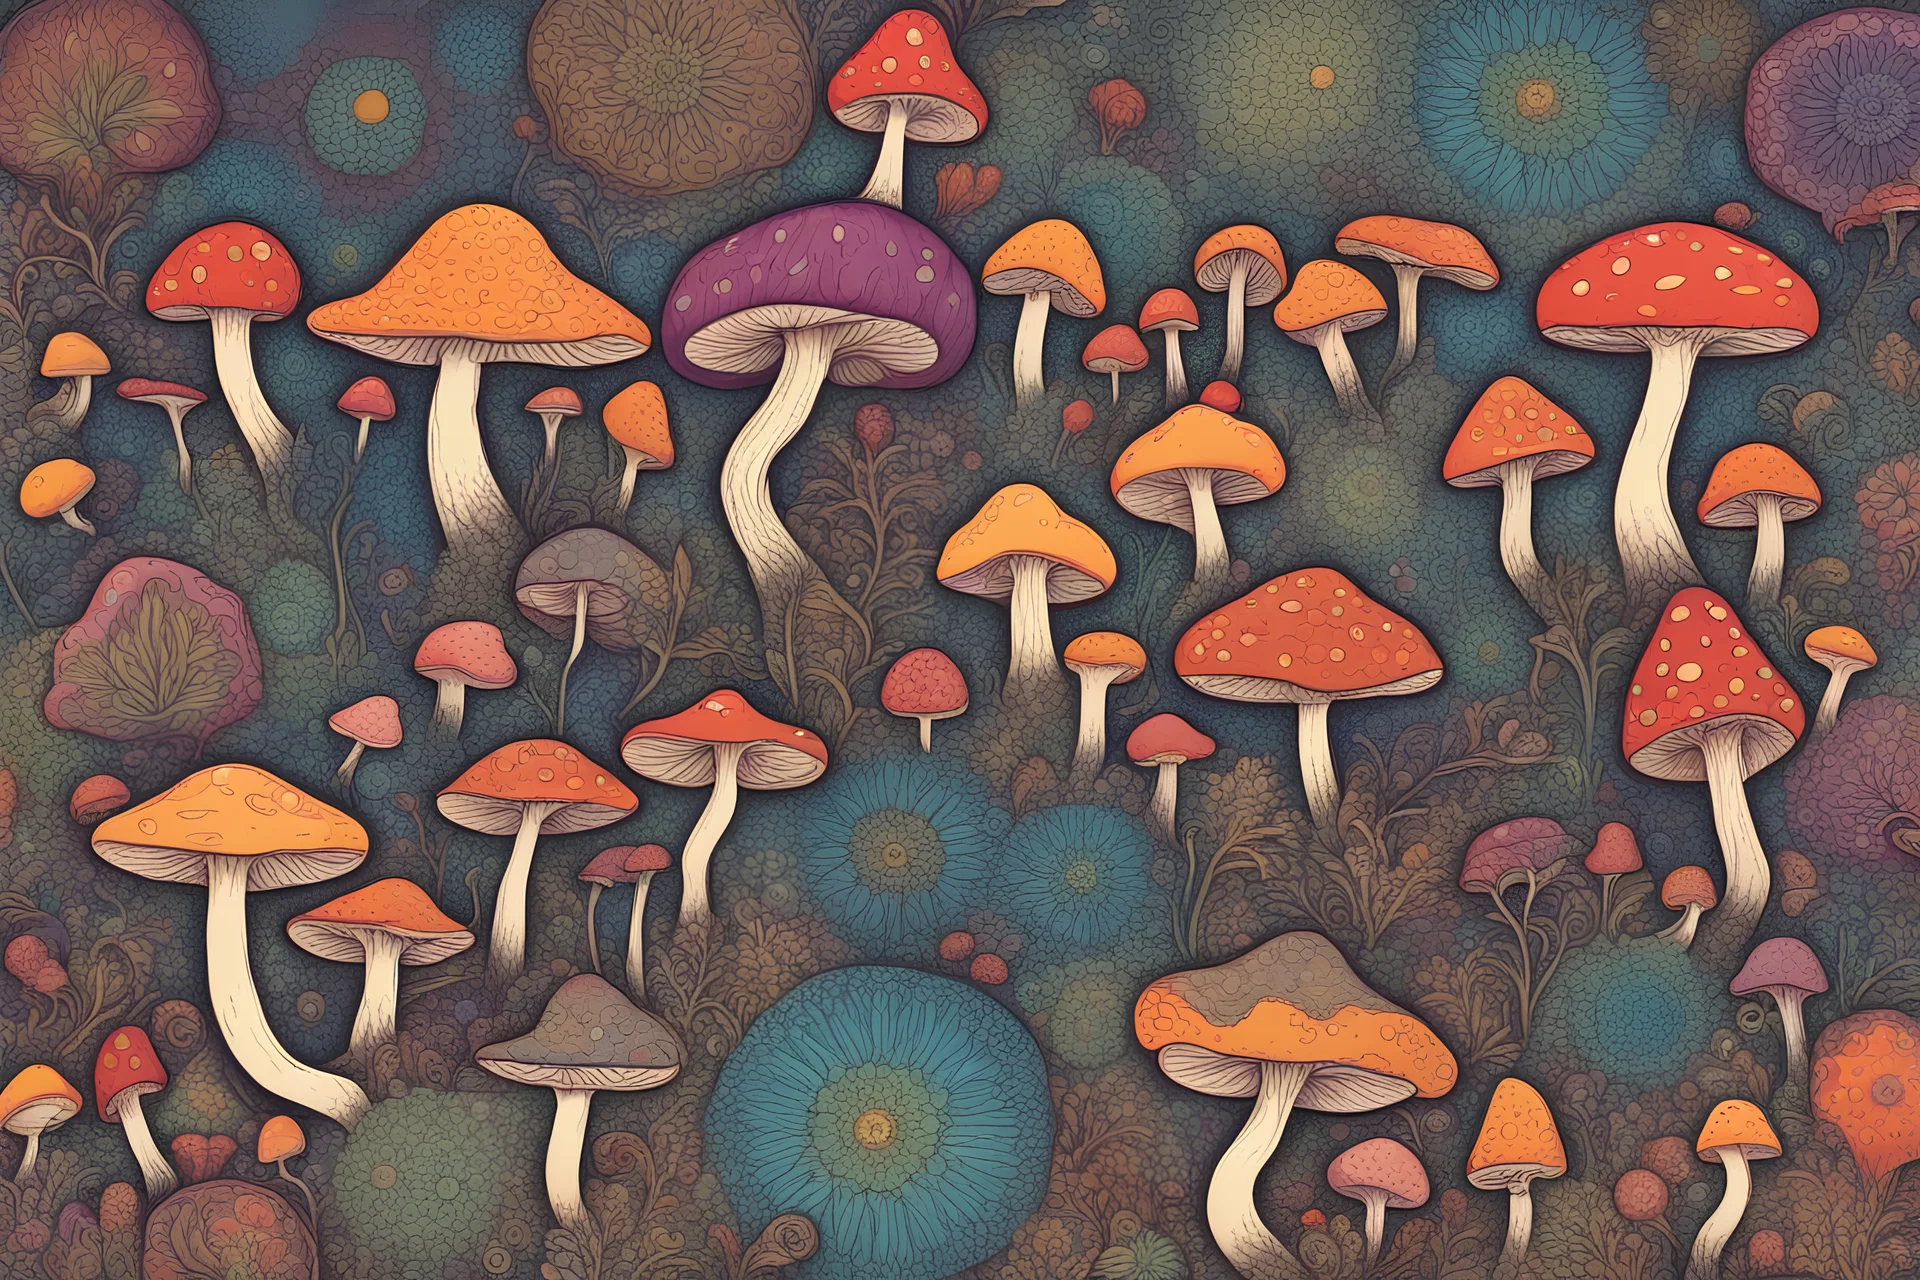 A place to be happy and do psychodelic mushrooms